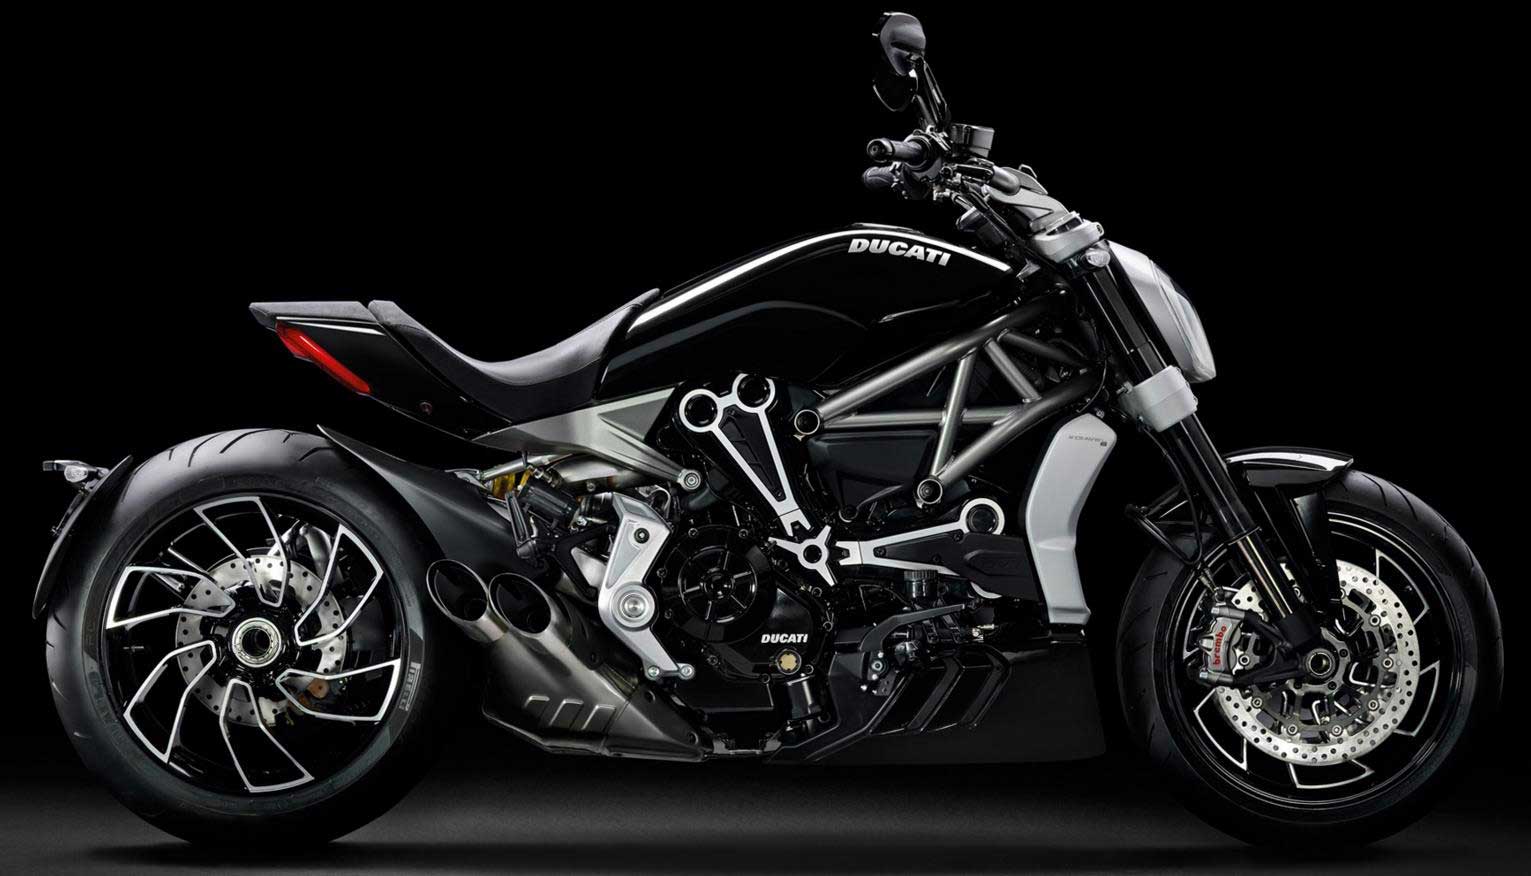 Ducati Xdiavel S Image Gallery, Pictures, Photos